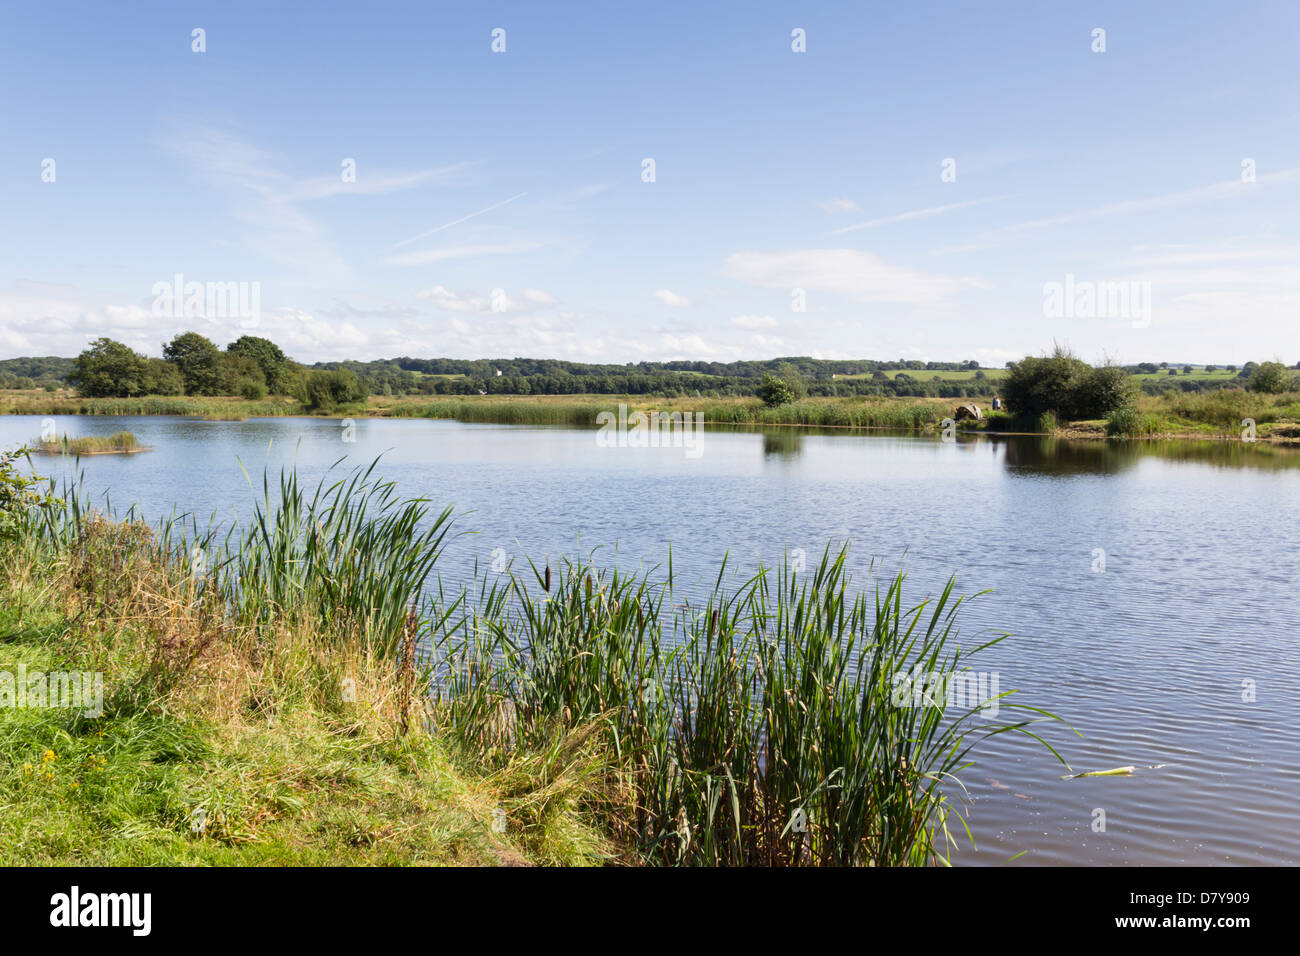 Part of Brockholes nature reserve near Preston purchased and created by the Lancashire Wildlife Trust from former gravel pits. Stock Photo